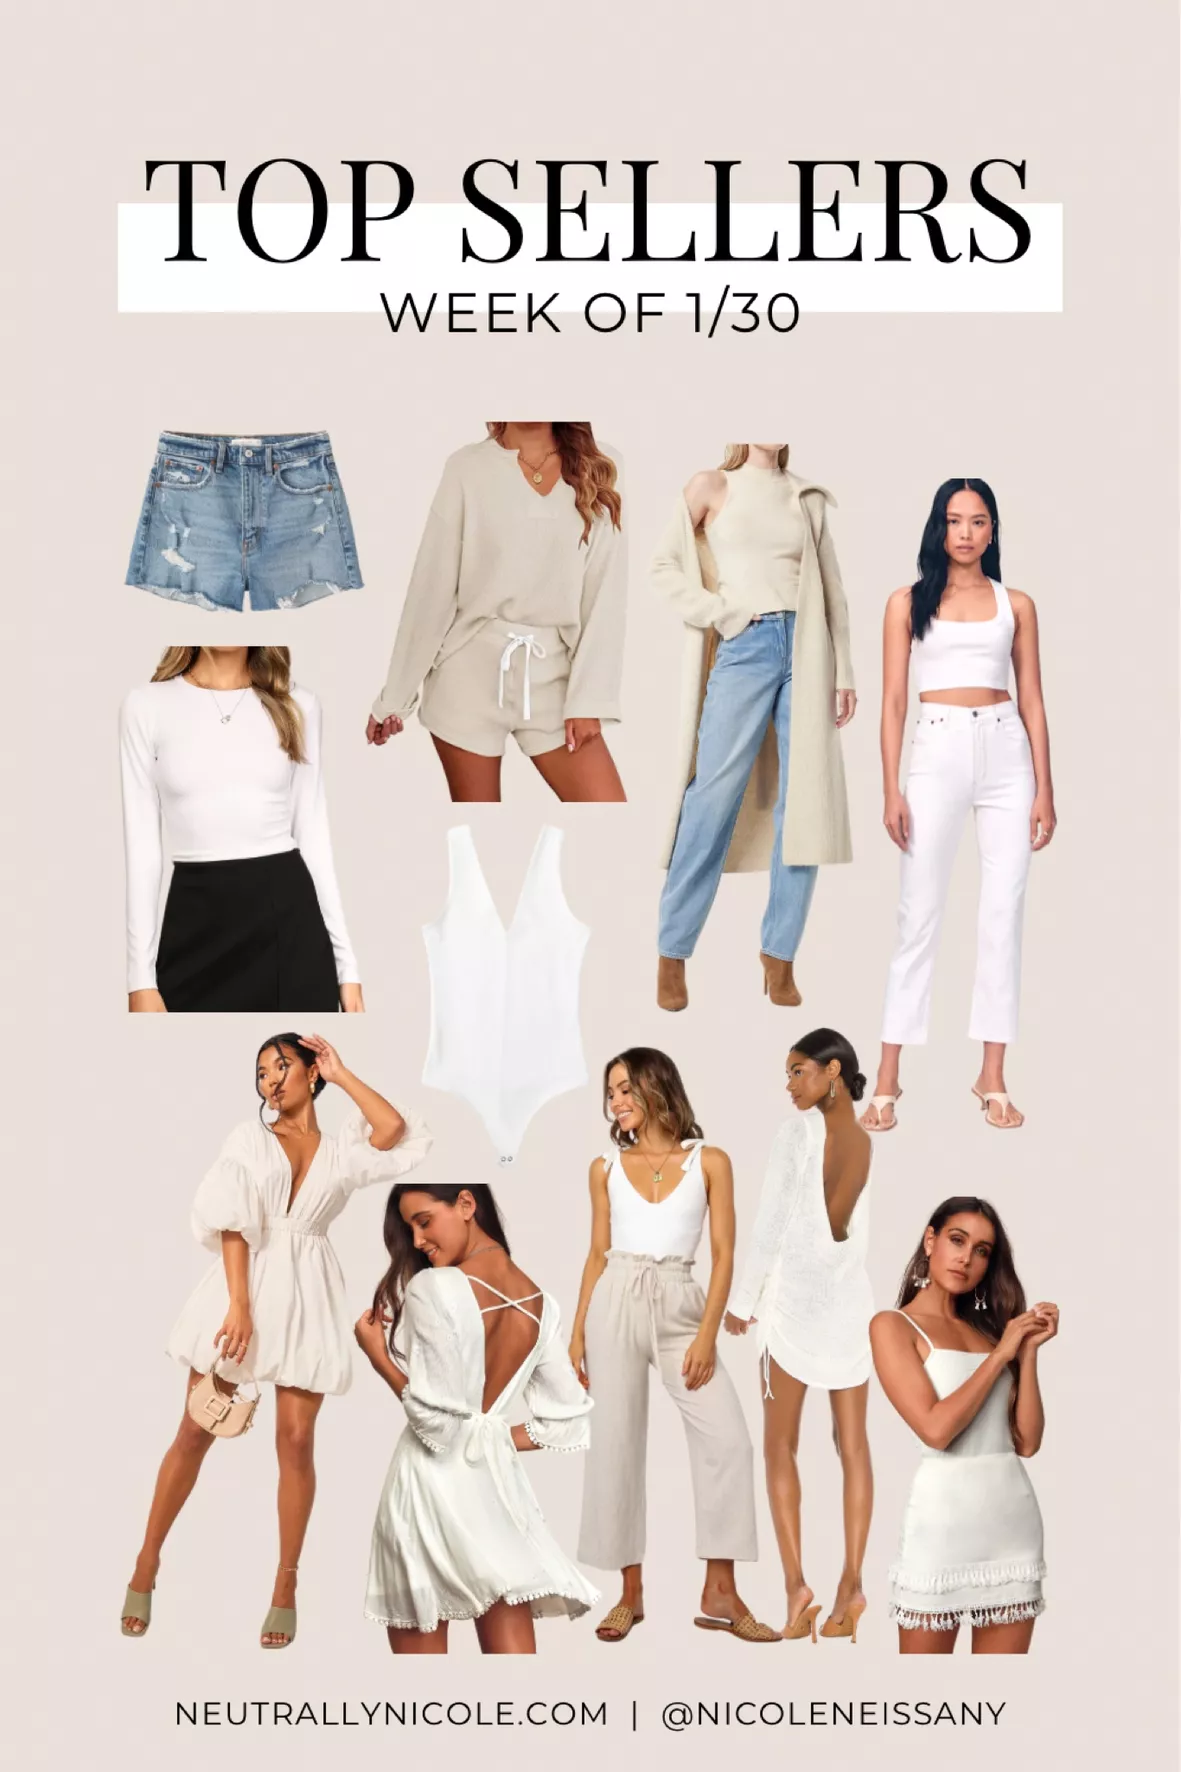 Begin with the Basics White Long Sleeve Crop Top